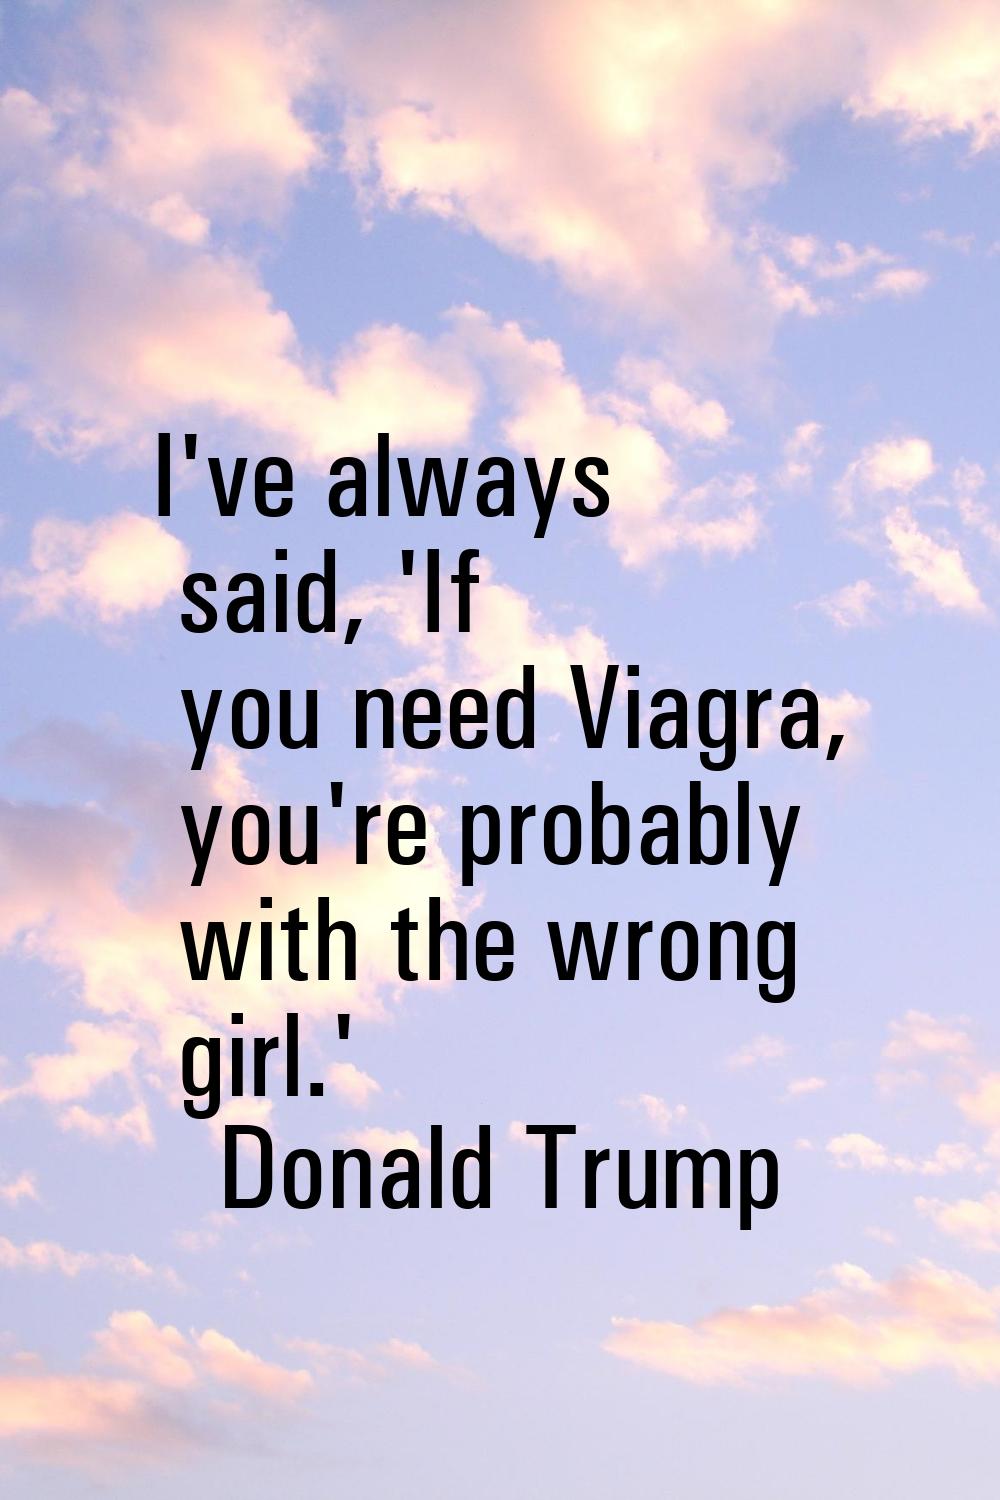 I've always said, 'If you need Viagra, you're probably with the wrong girl.'